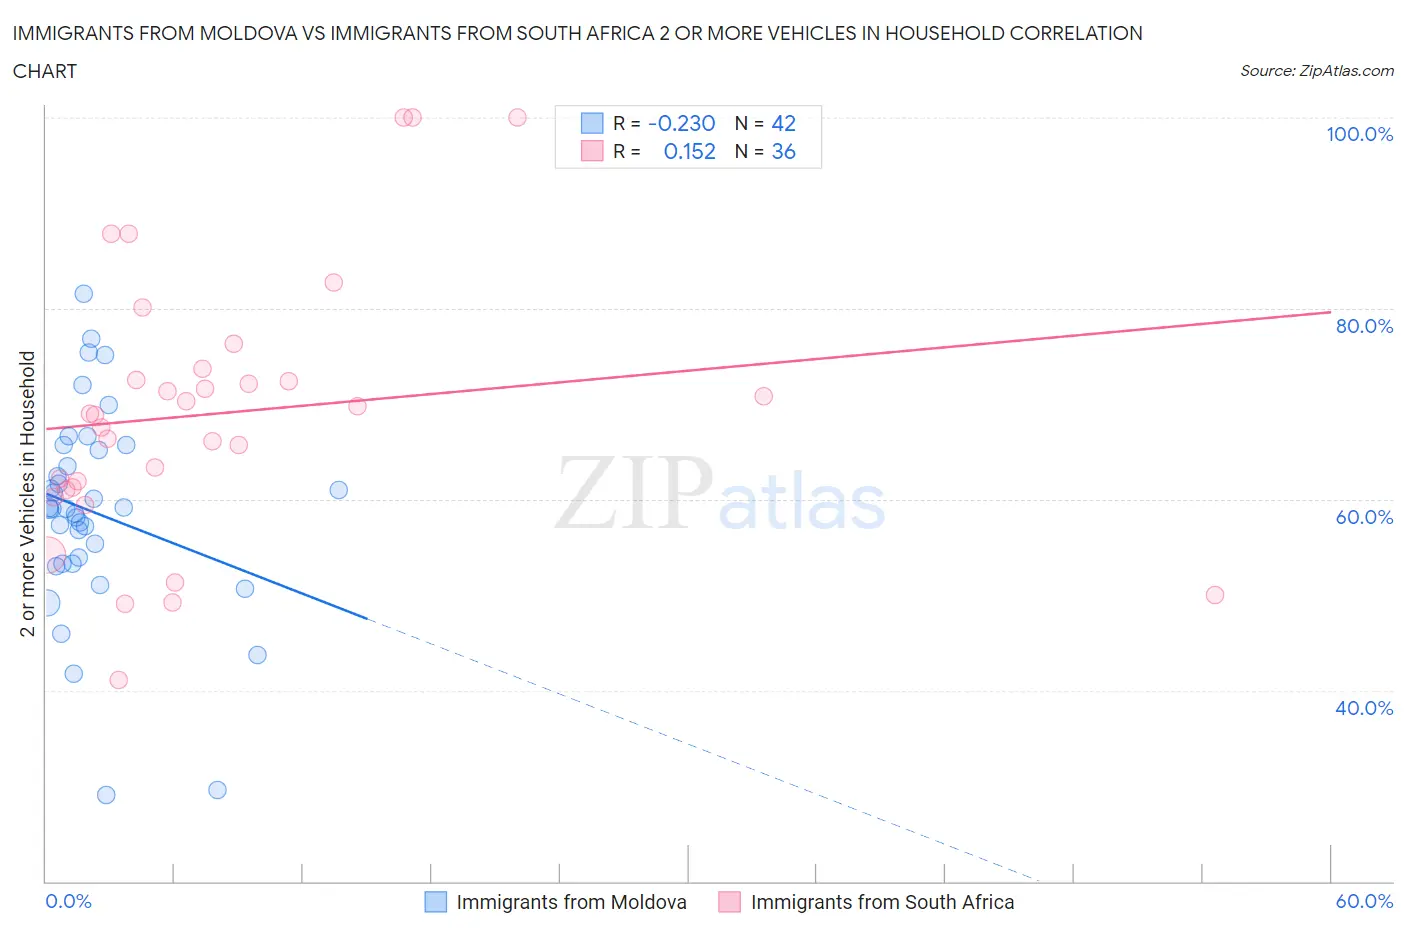 Immigrants from Moldova vs Immigrants from South Africa 2 or more Vehicles in Household